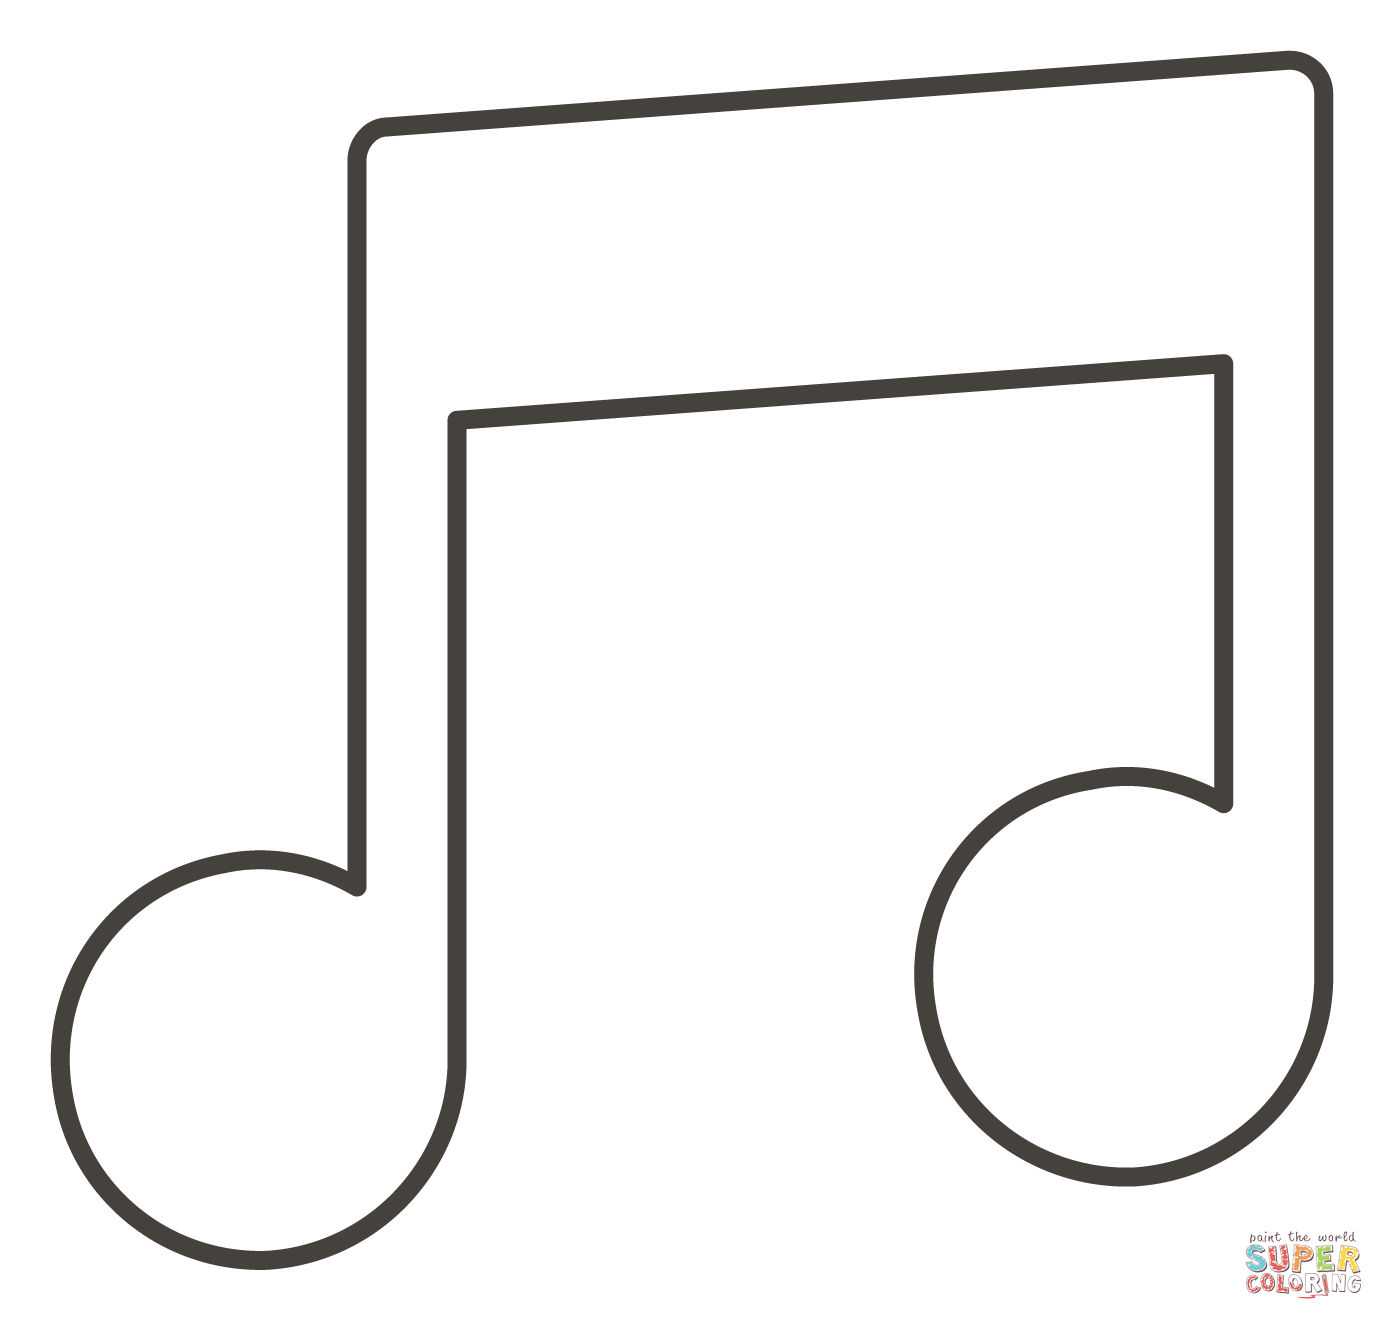 Musical note coloring page free printable coloring pages